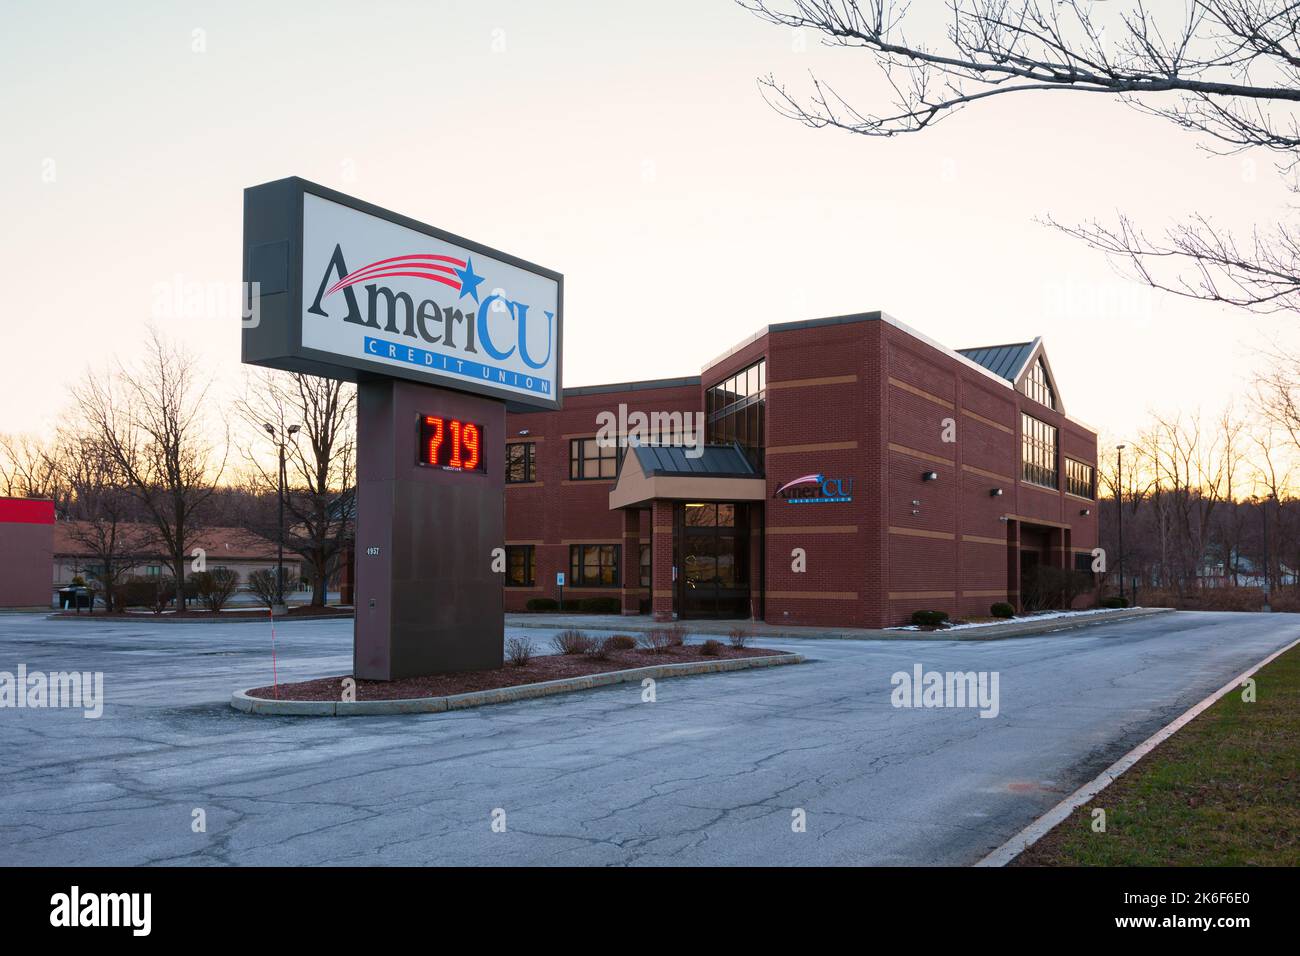 New Hartford, New York - Mar 29, 2022: Landscape Wide View of AmeriCU Credit Union Building Exterior, Americu is Mainly Operative in Northern and Cent Stock Photo